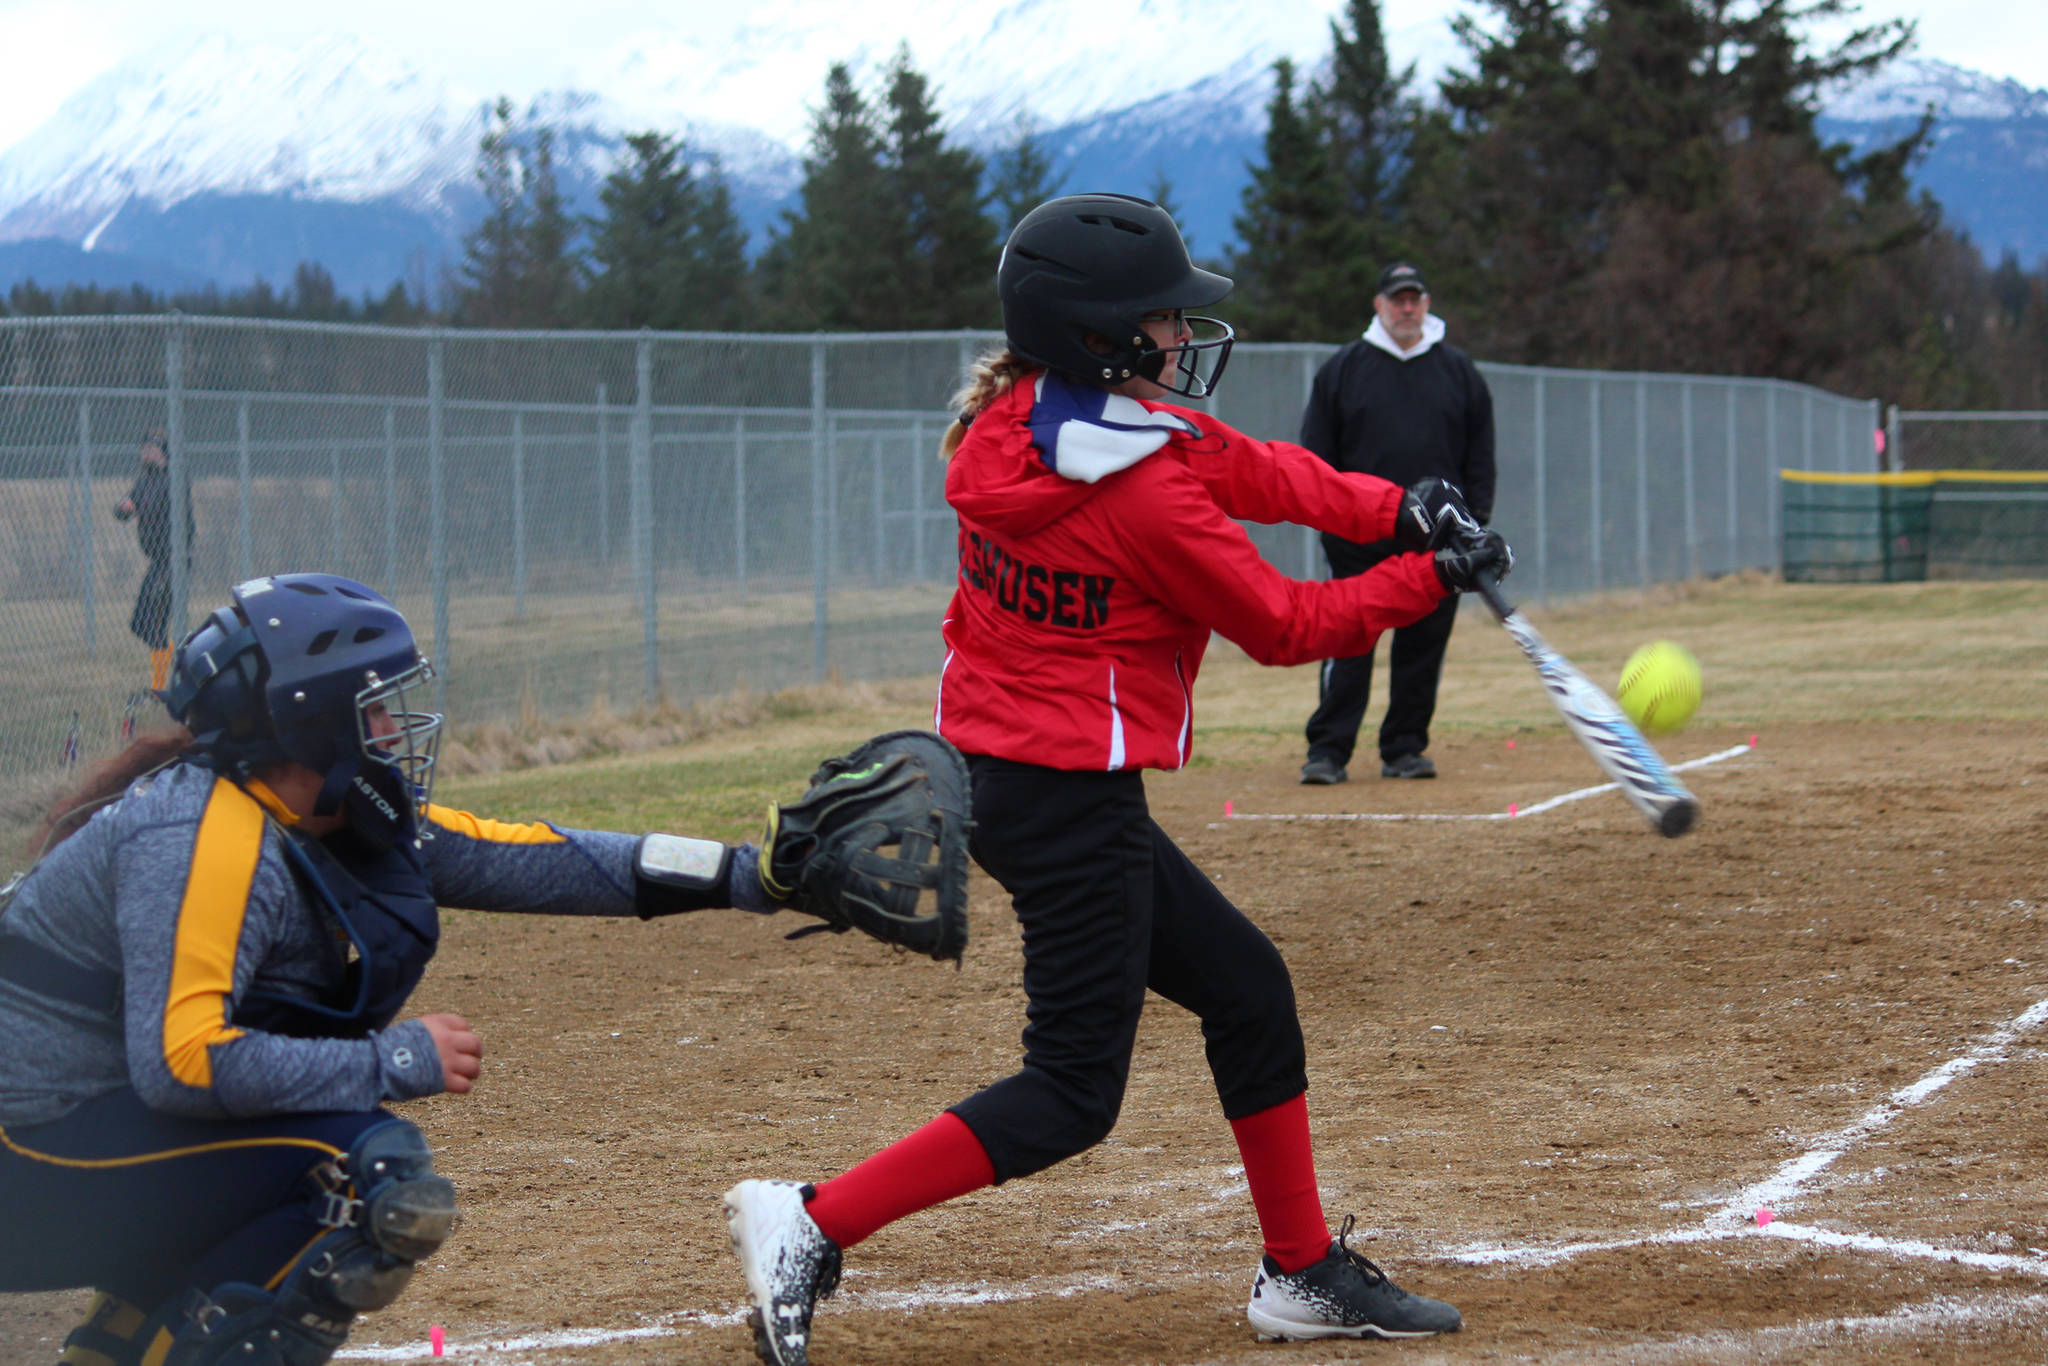 Kenai’s Zaharah Wibhusen hits the ball during the Kardinals’ softball game against Homer High School on Tuesday, May 8, 2018 in Jack Gist Park in Homer, Alaska. (Photo by Megan Pacer/Homer News)